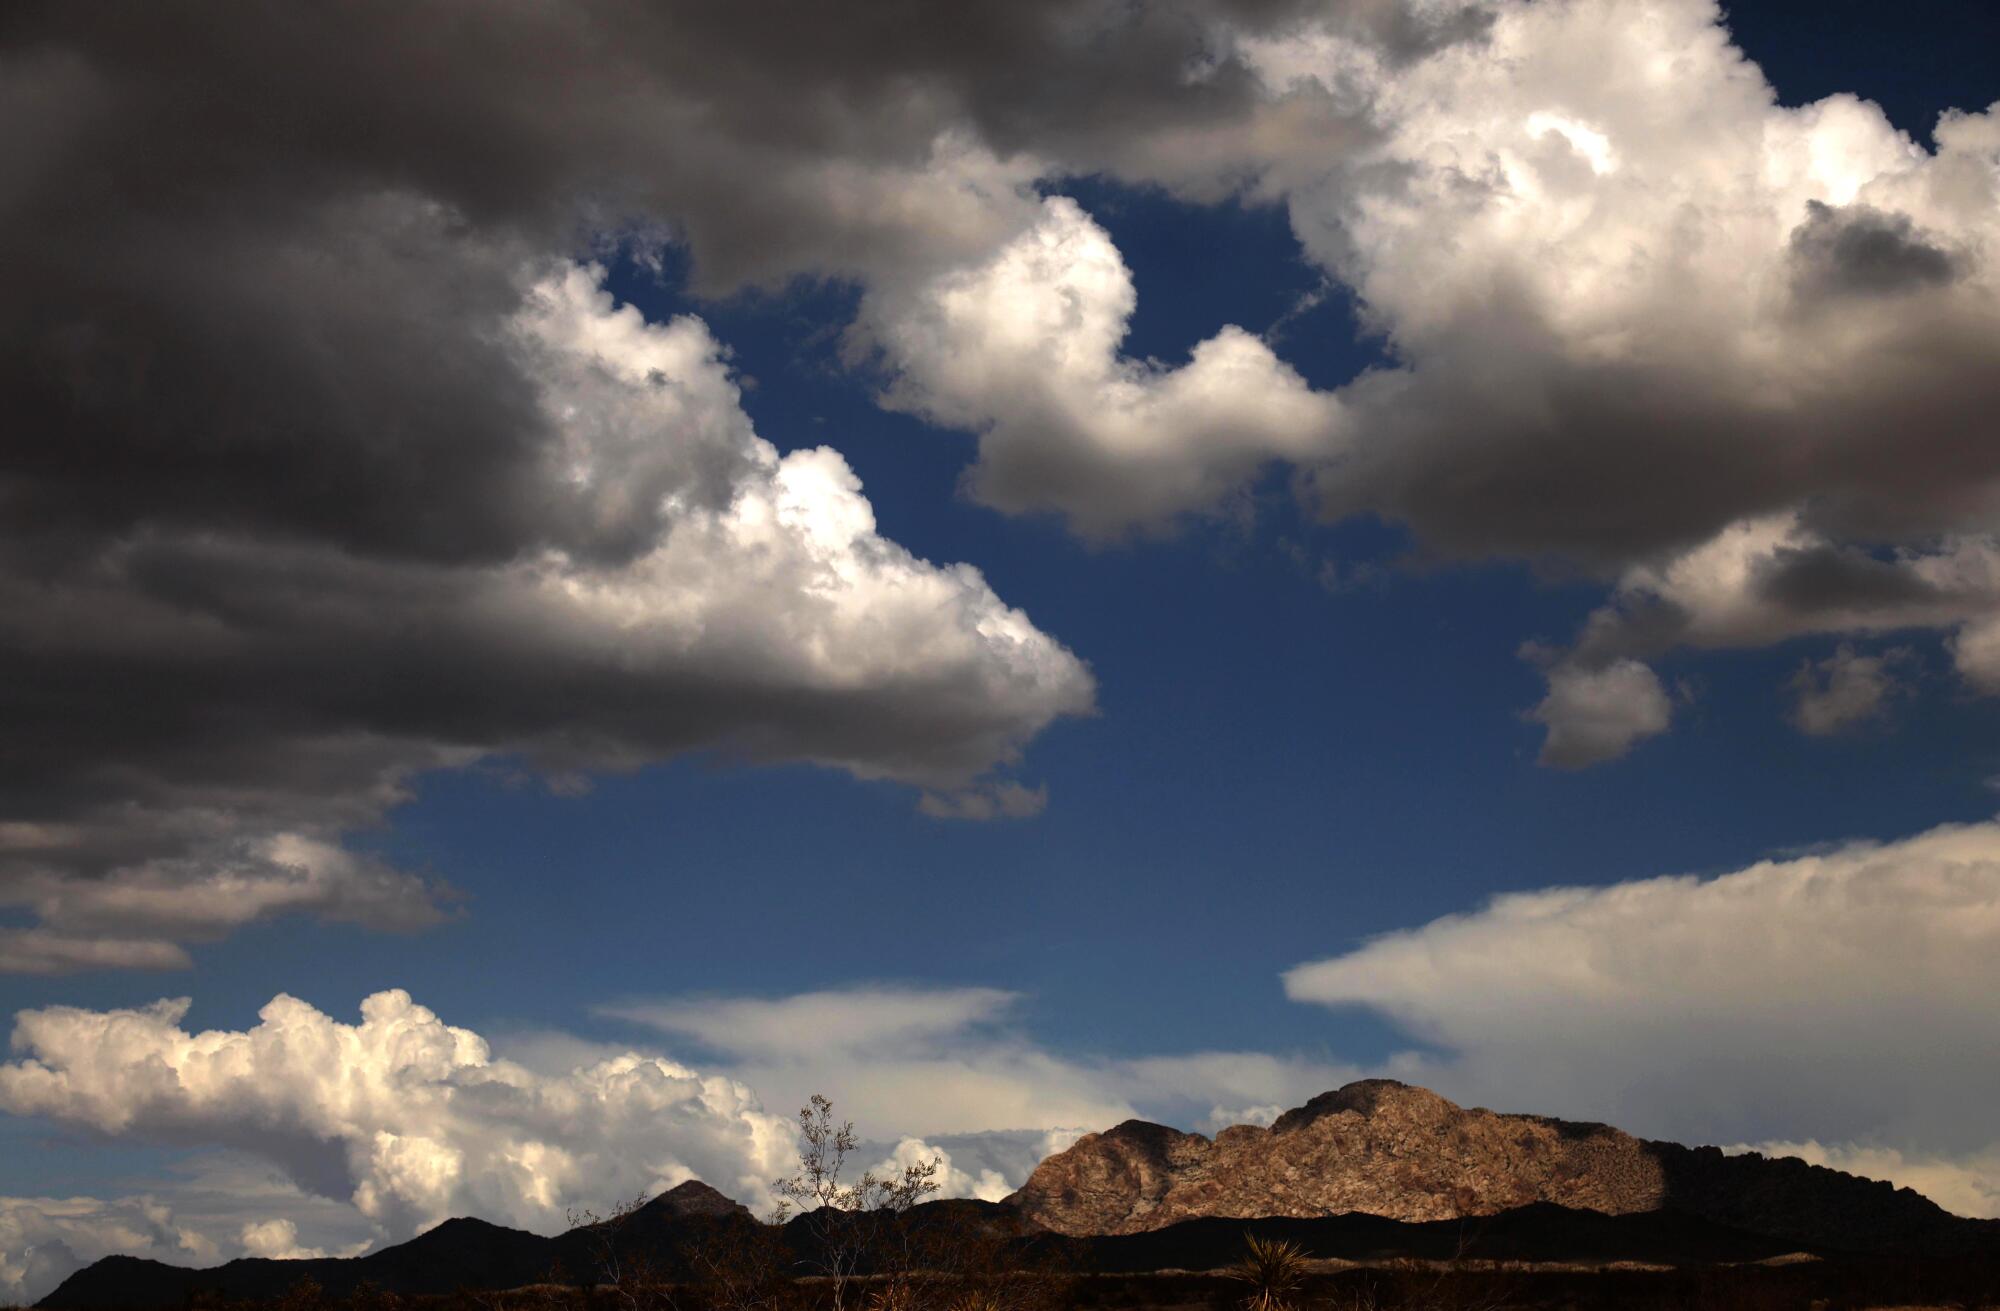 Clouds part to throw a spotlight on Avi Kwa' Ame or Spirit Mountain, within the Lake Mead National Recreation Area.